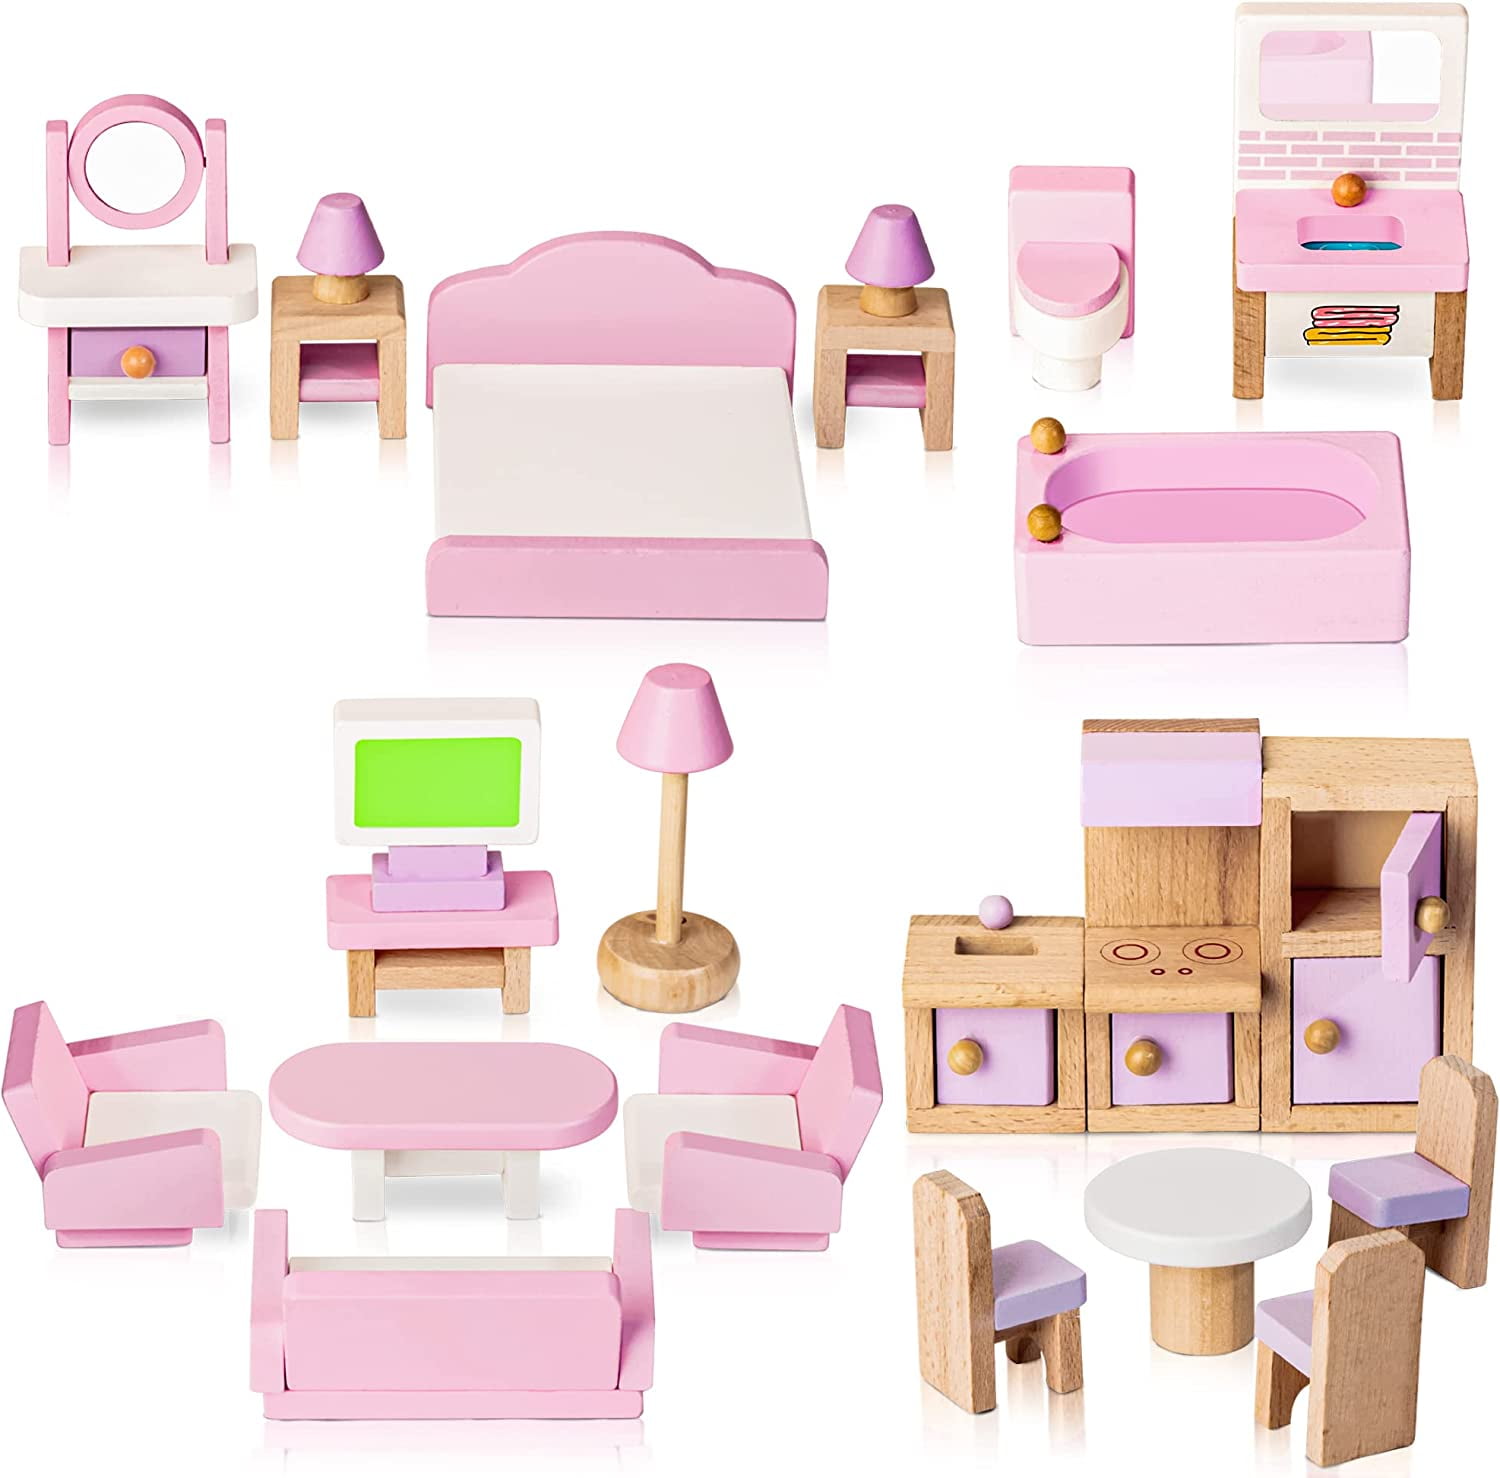 Class M907 Wooden Doll House Classroom Toys Diy Dollhouse Furnitures Music  Kids Furniture Minature Doll Houses Kit Poppenhuis